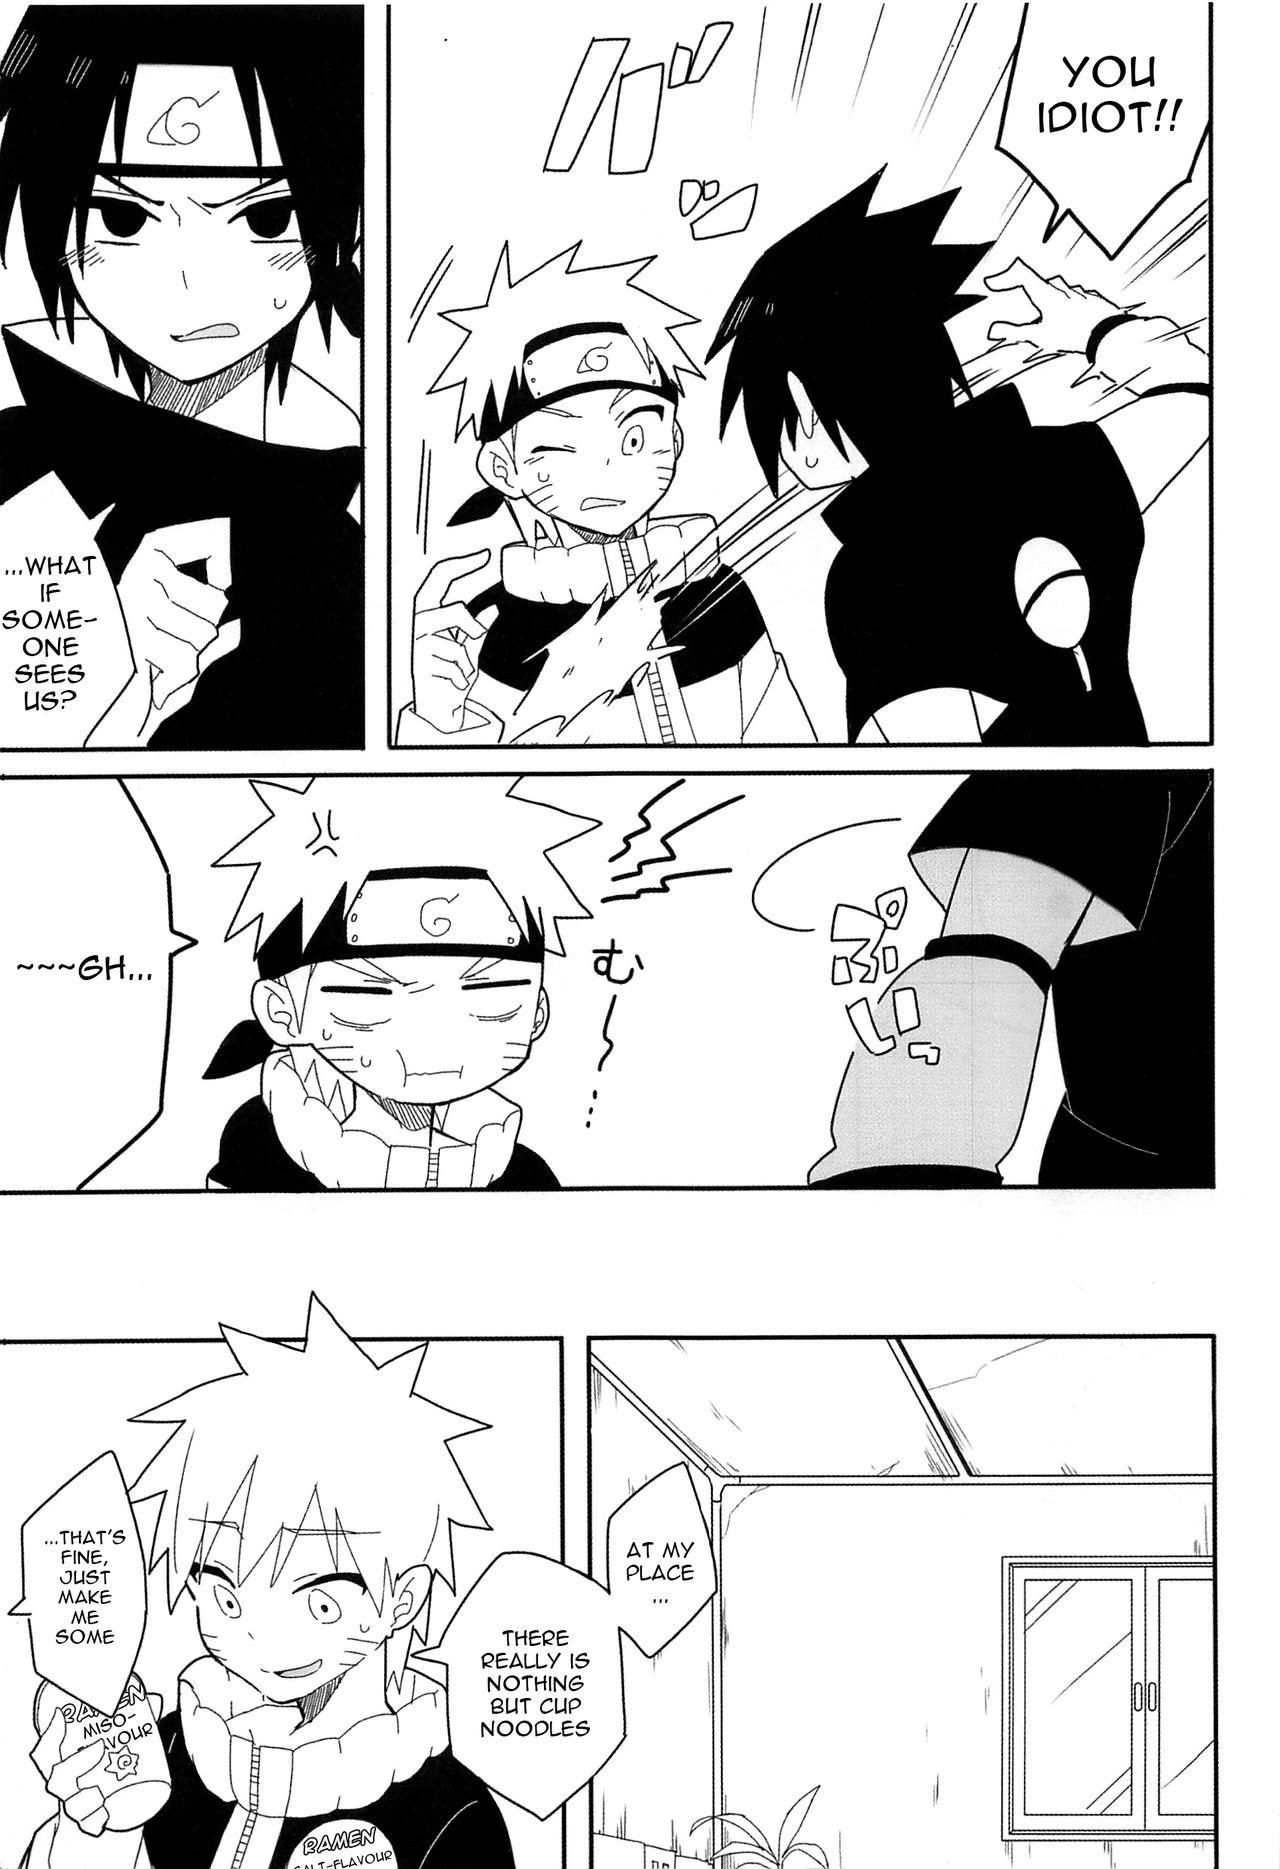 Roleplay Break through - Naruto Realamateur - Page 2